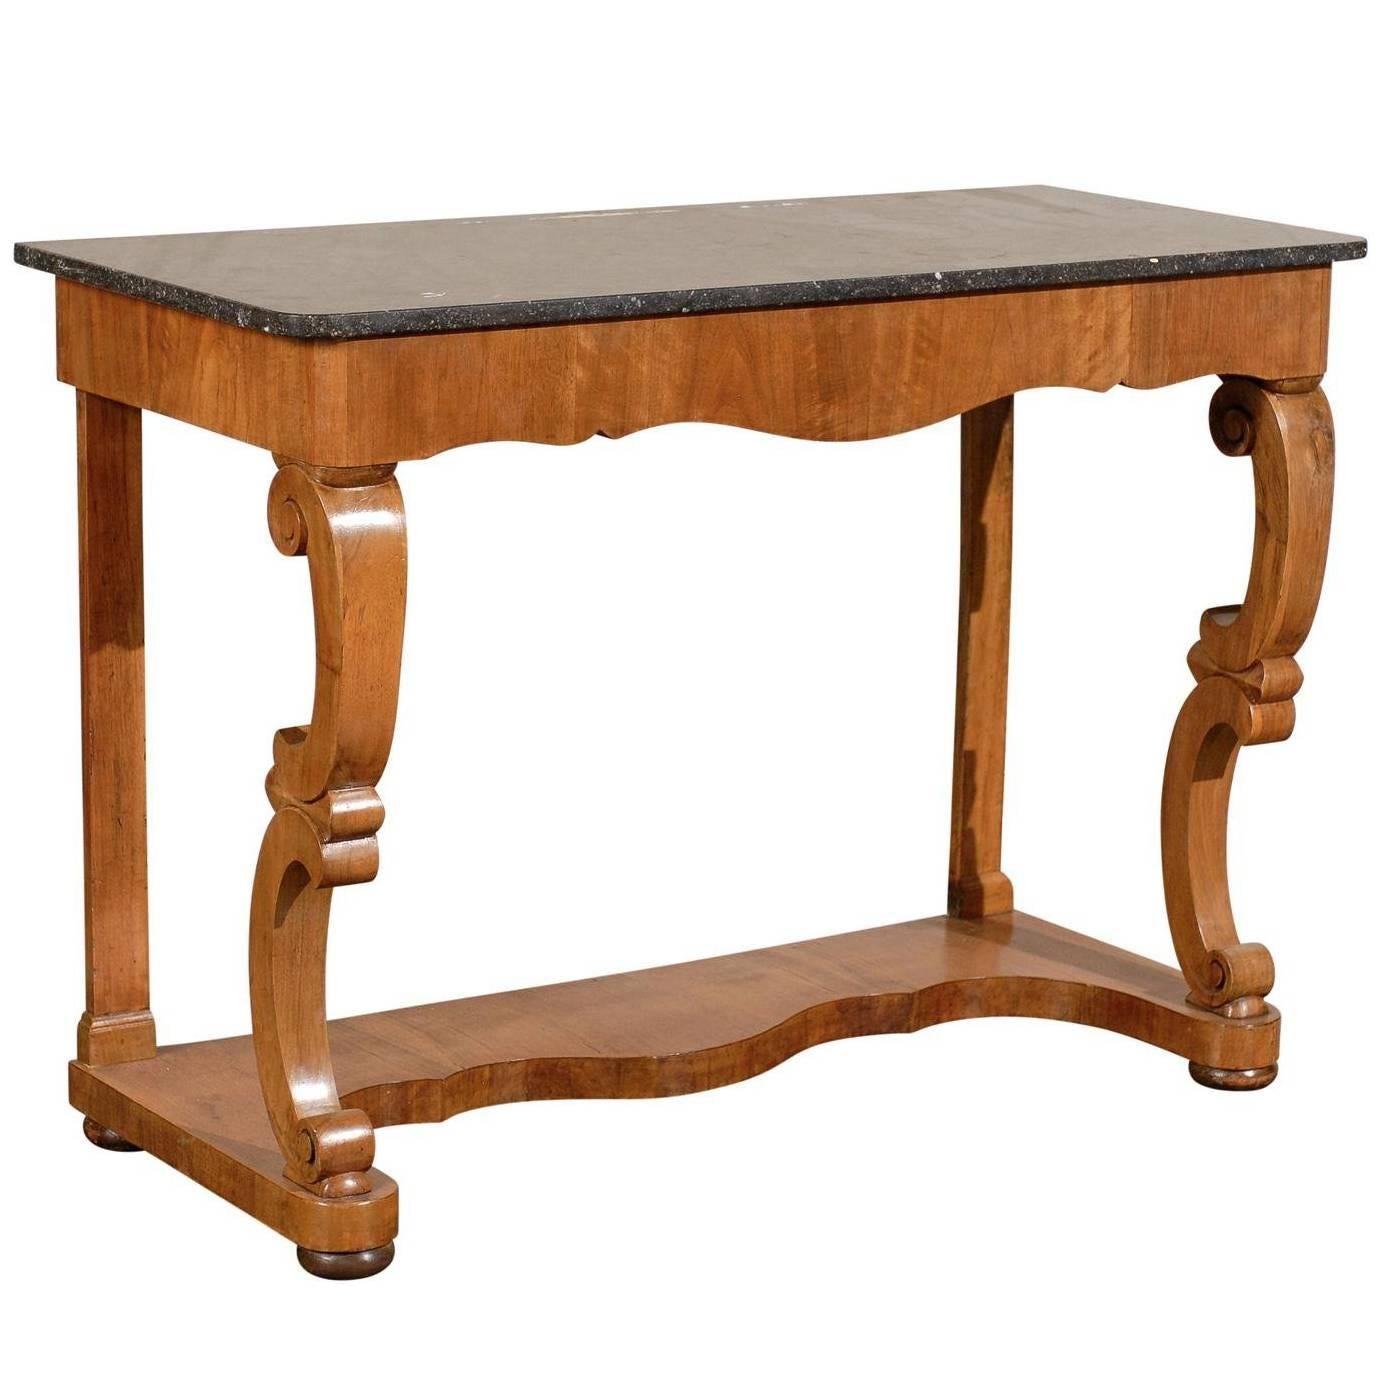 19th Century Charles X Console with Black Marble Top, circa 1825